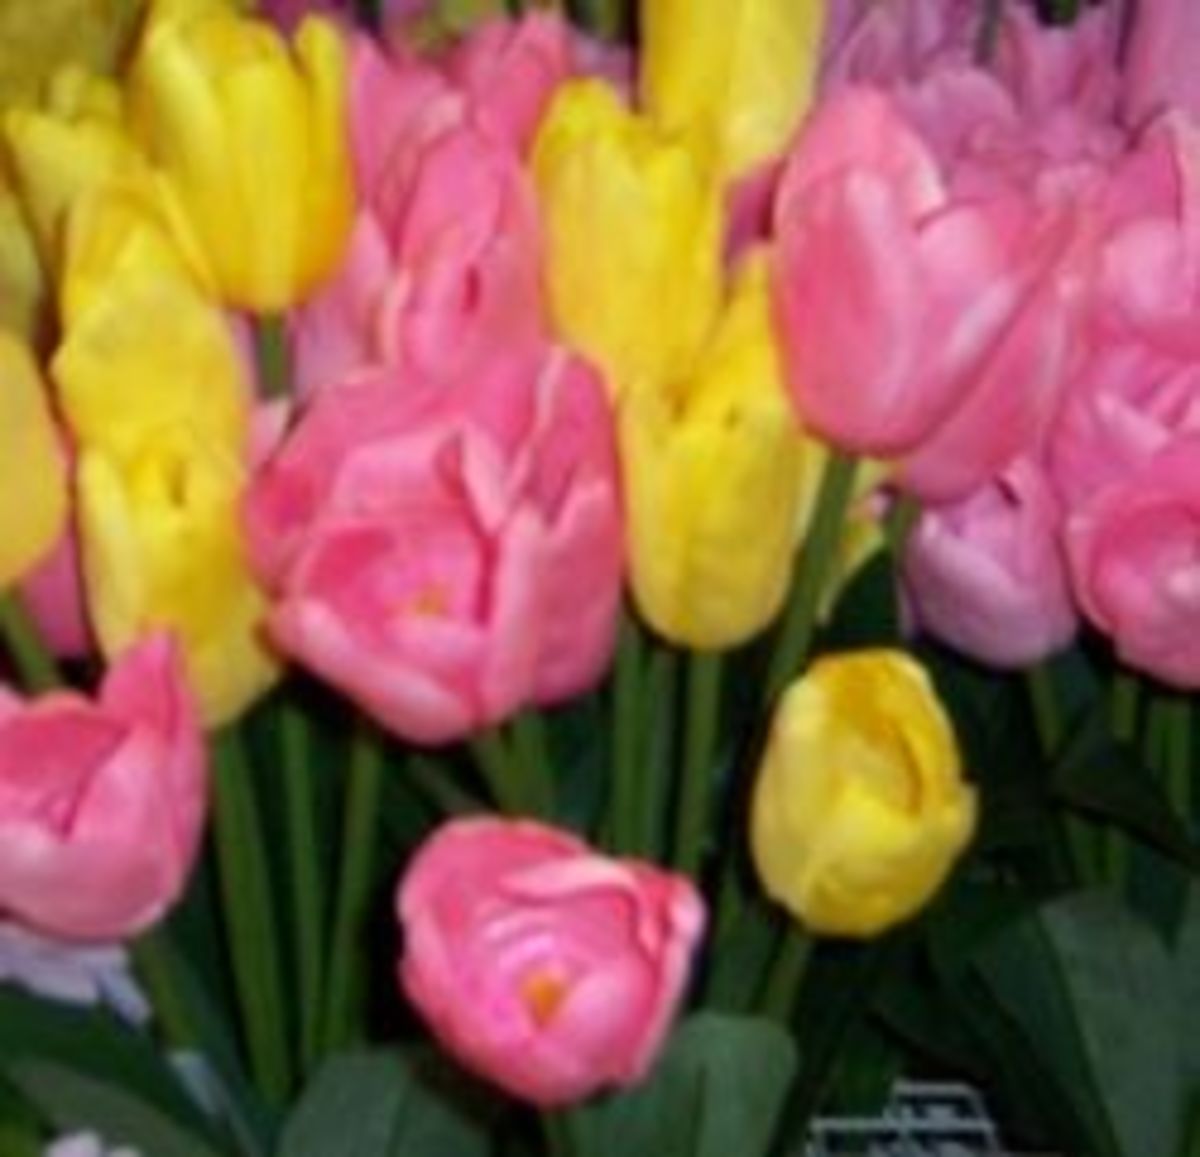 Silk tulips are often on sale at the end of spring. The ones pictured were very inexpensive.